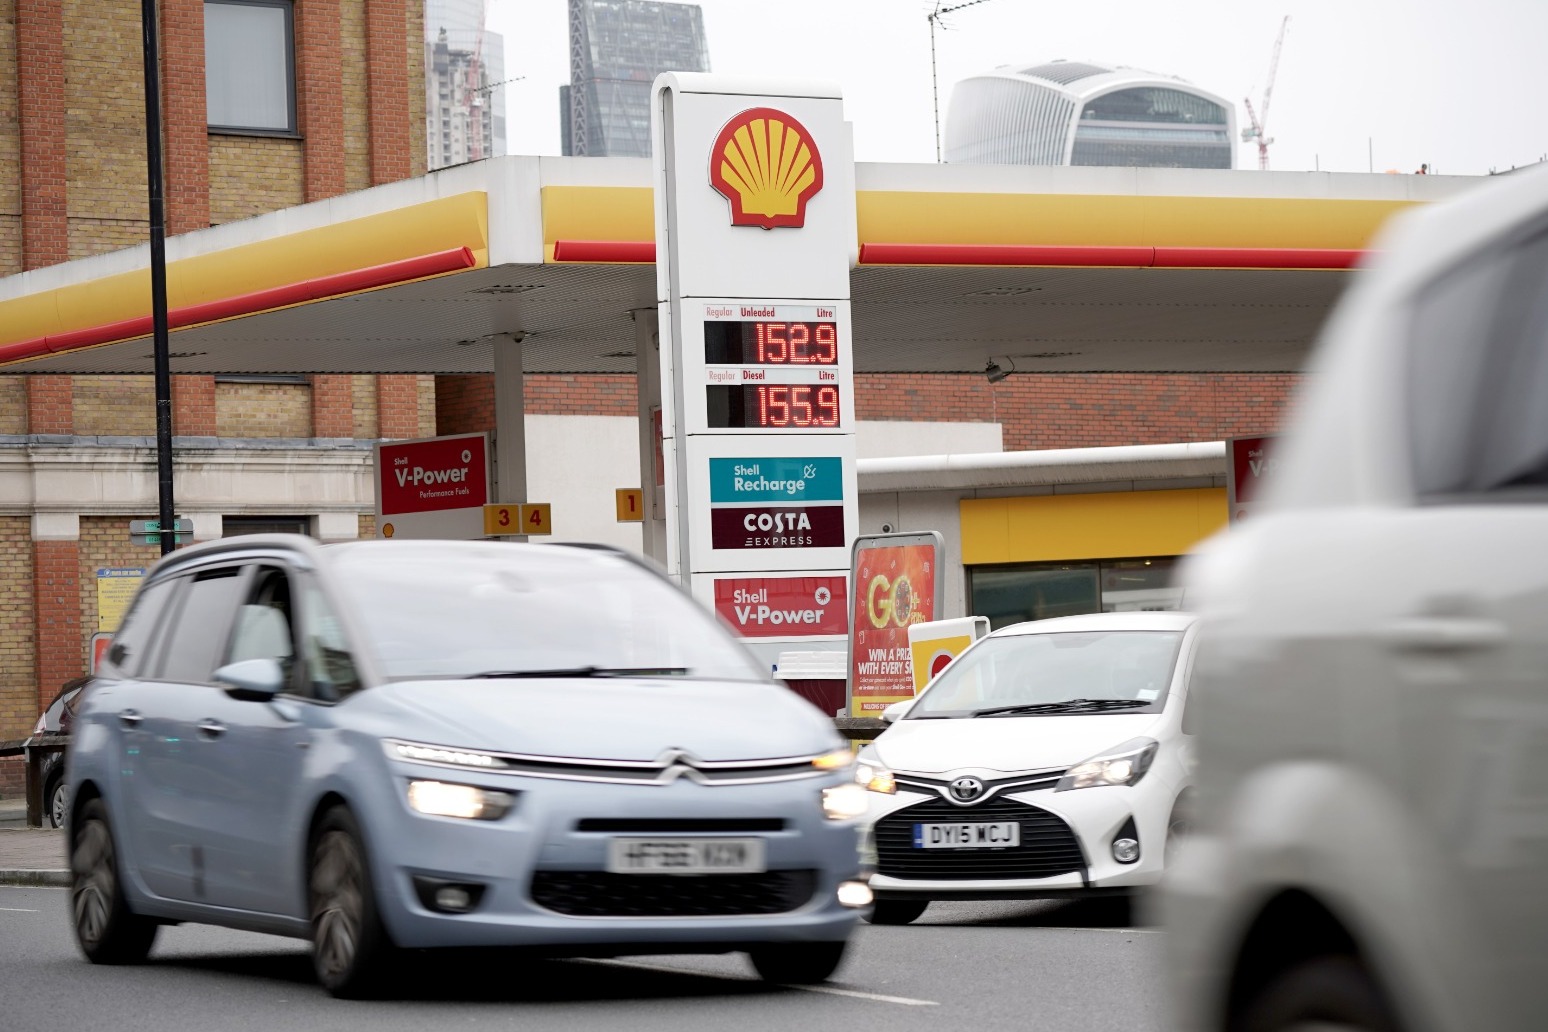 Fuel prices reach new highs due to Ukraine crisis